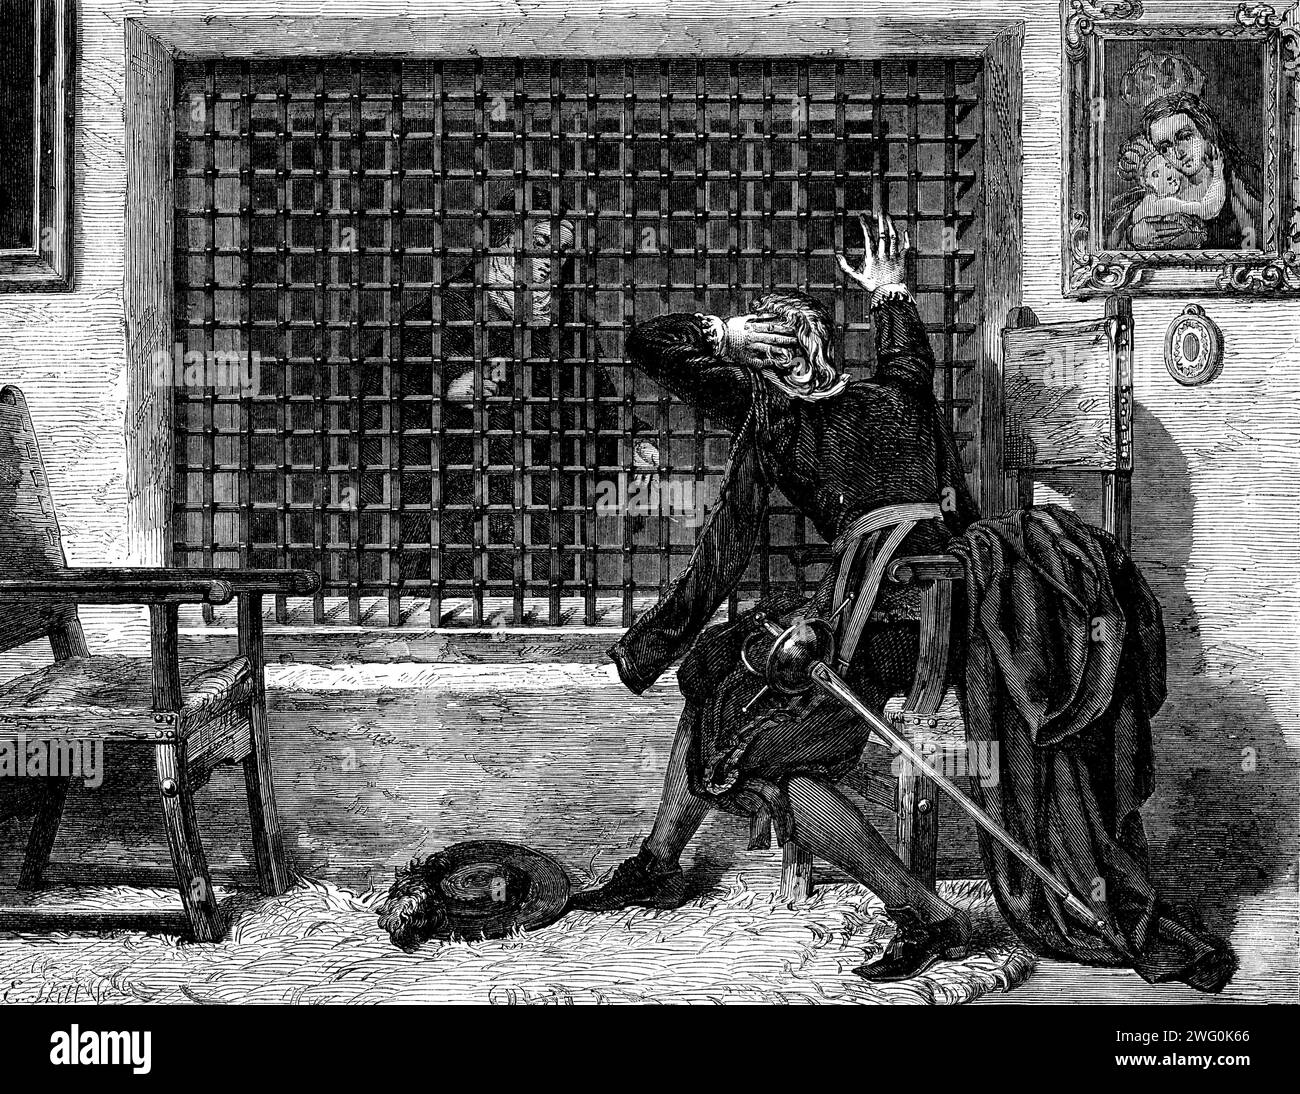 The International Exhibition: &quot;Farewell - For Ever&quot;, by V. Manzano, 1862. Engraving of a painting. 'A young cavalier lover has been severed from his lady-love by her...being forced to take the veil and enter a convent. Wretched and inconsolable, he...dresses himself in deepest mourning and goes to the convent to catch one glimpse of the loved one...He sits...before the double iron grating of the cage, the perpetual prison of his lost love...Here she at length comes...but with no words of hope or comfort, only the dreaded &quot;Adios per siempre.&quot; The poor distracted fellow in va Stock Photo